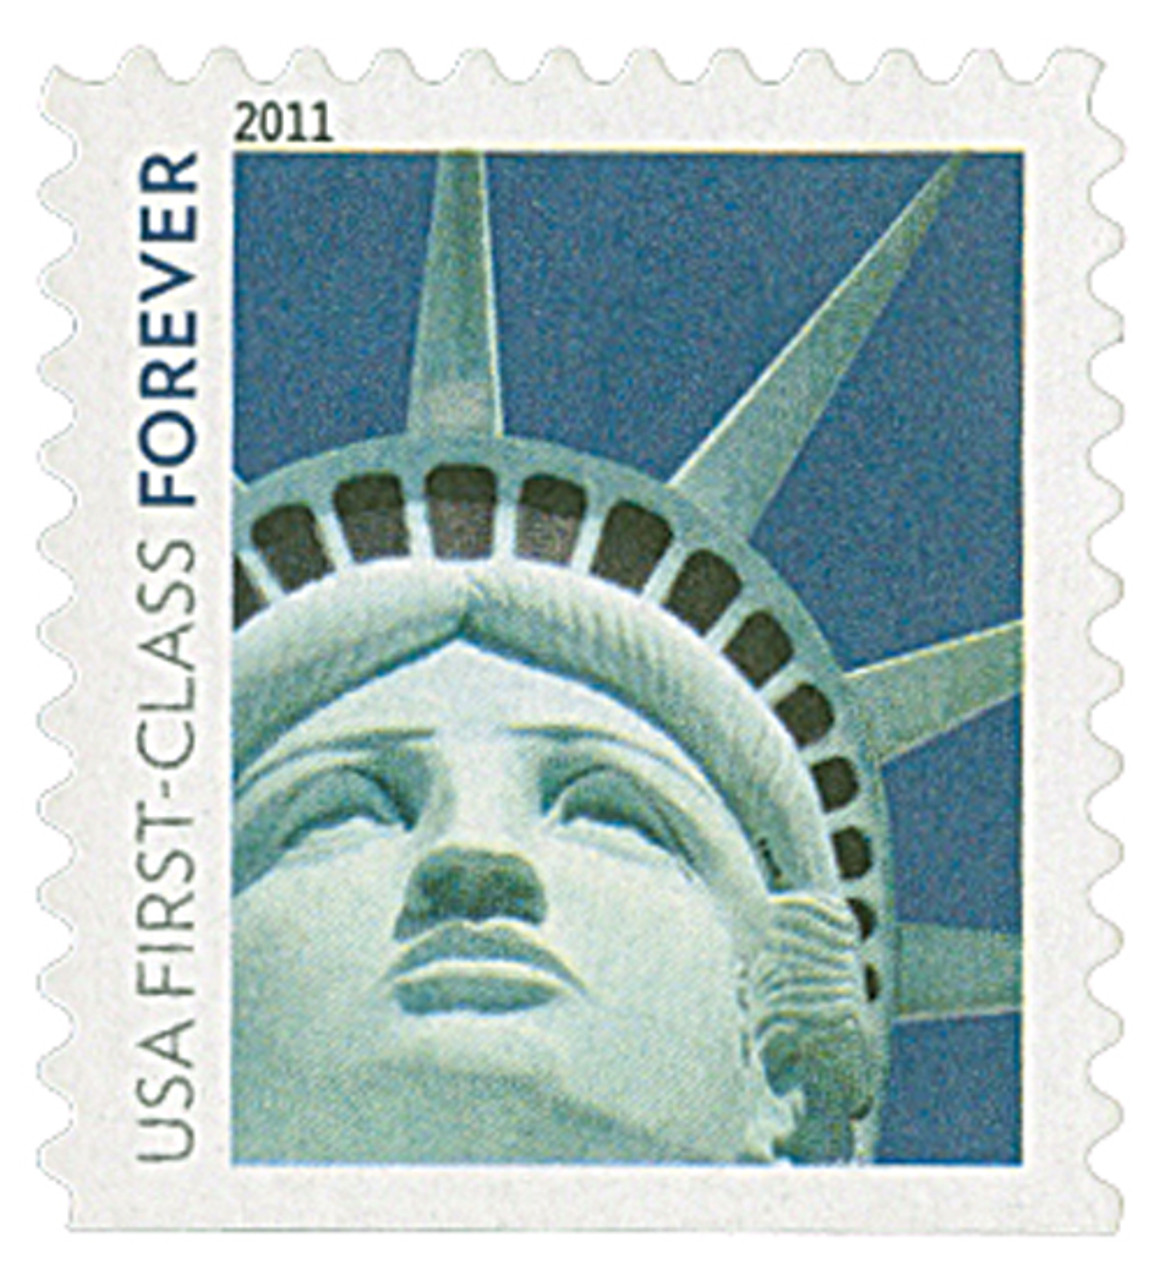 5131 - 2016 First-Class Forever Stamp - Patriotic Spiral (Ashton